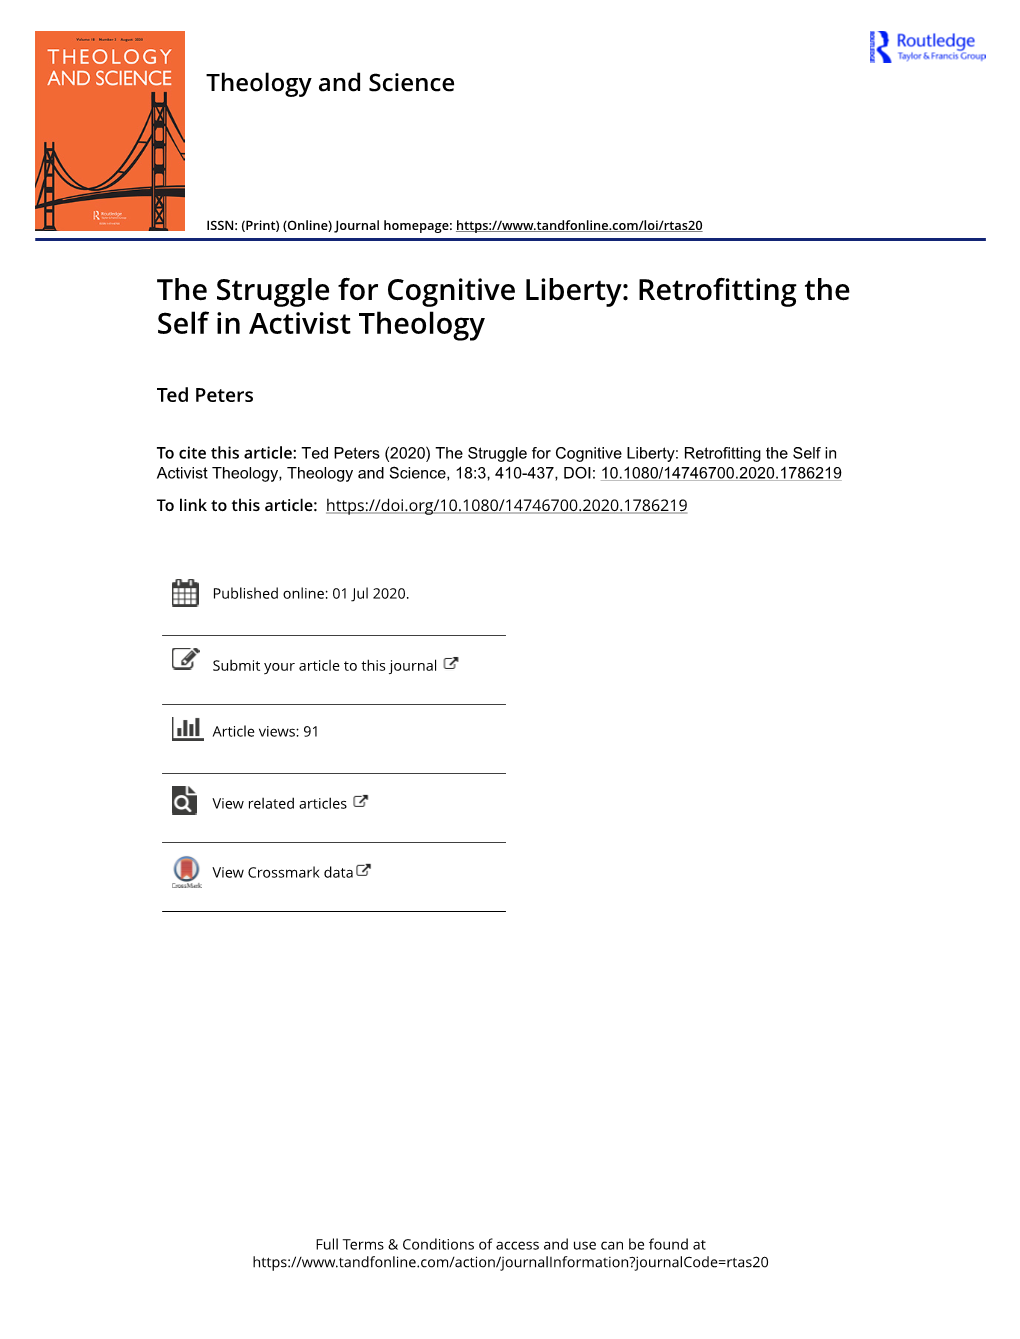 The Struggle for Cognitive Liberty: Retrofitting the Self in Activist Theology